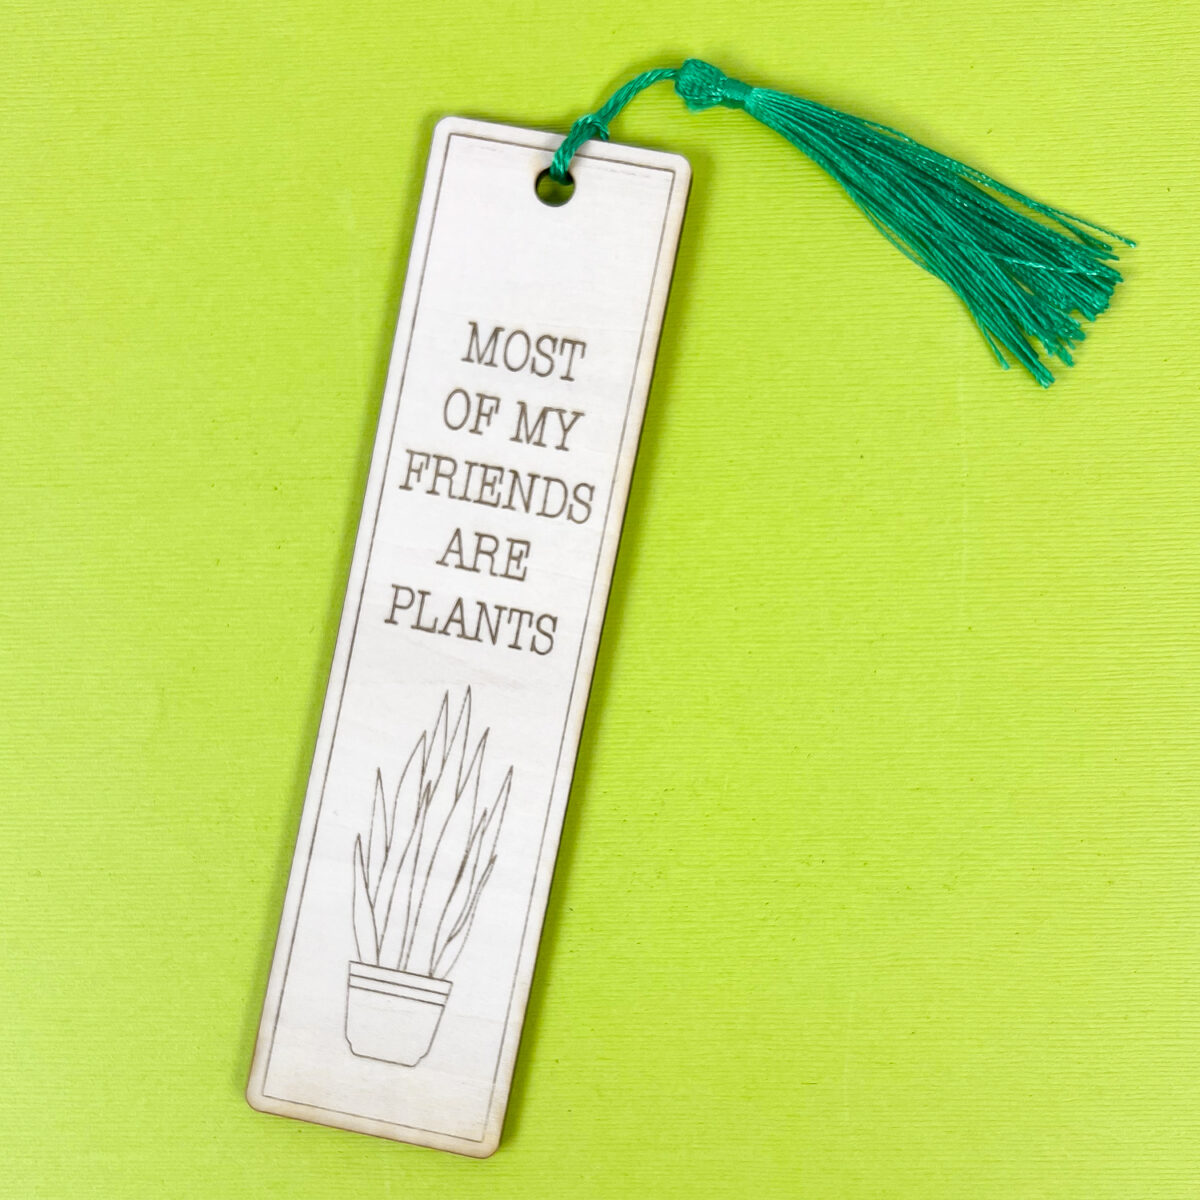 Most of my friends are plants bookmark on green background.